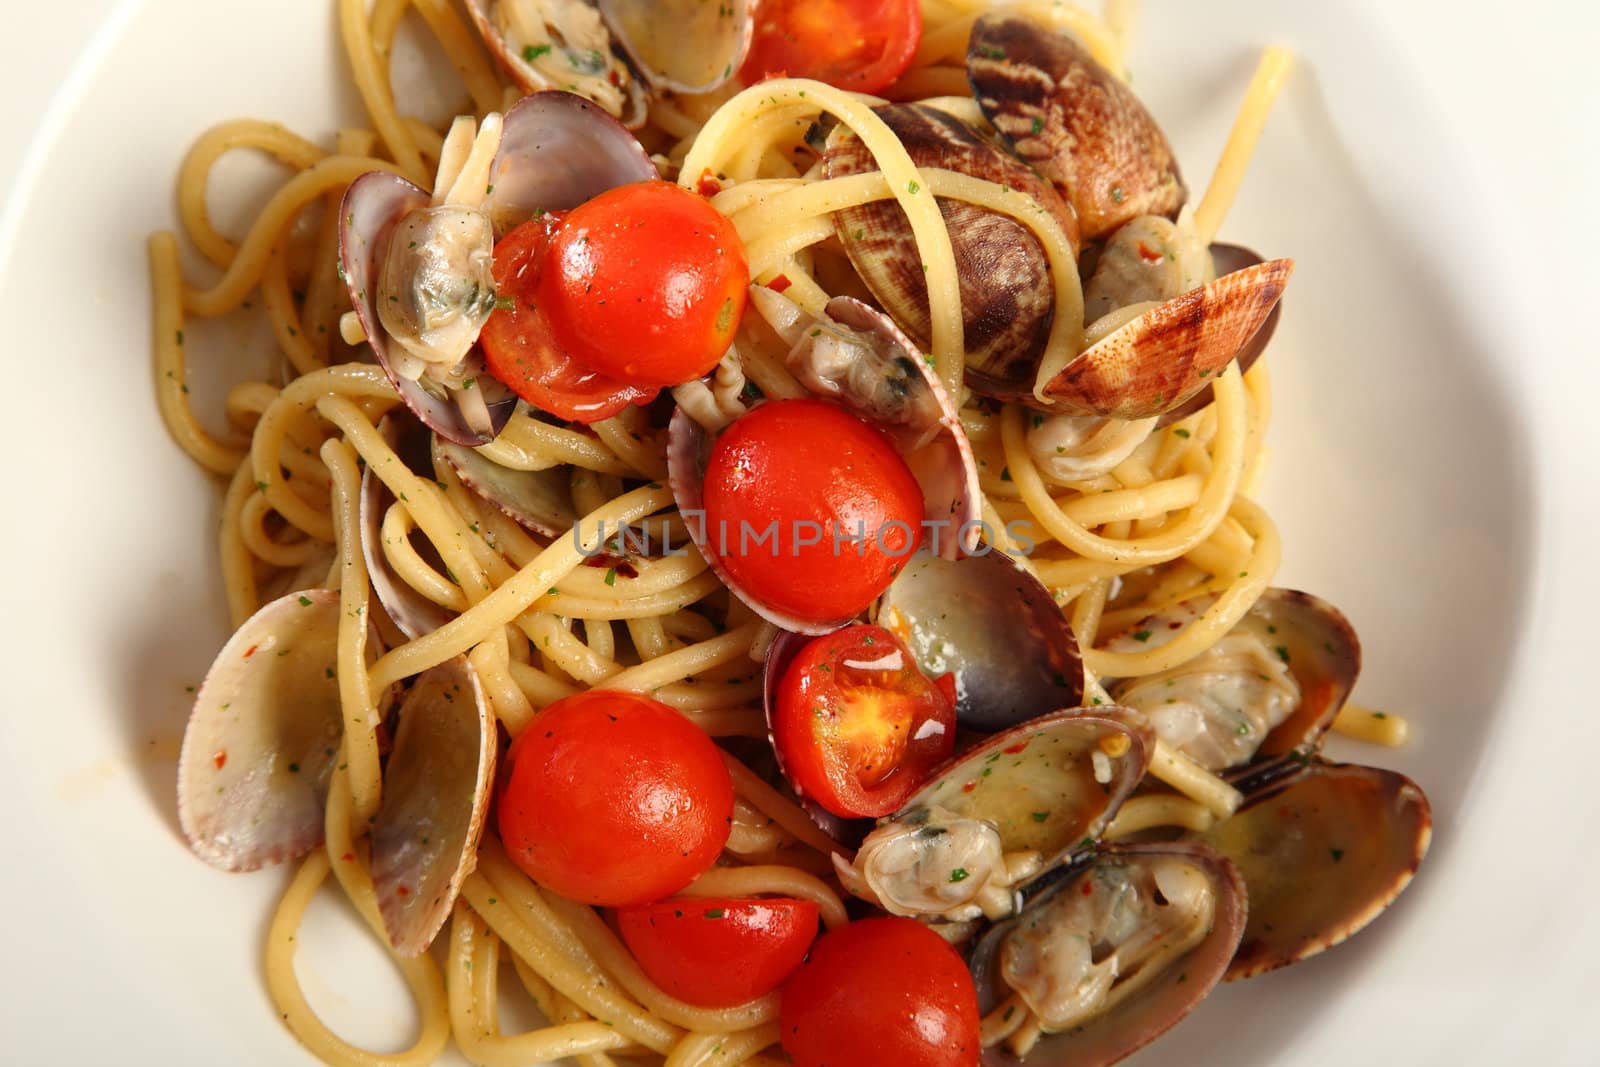 Linguine with clams and tomatoes served in dish